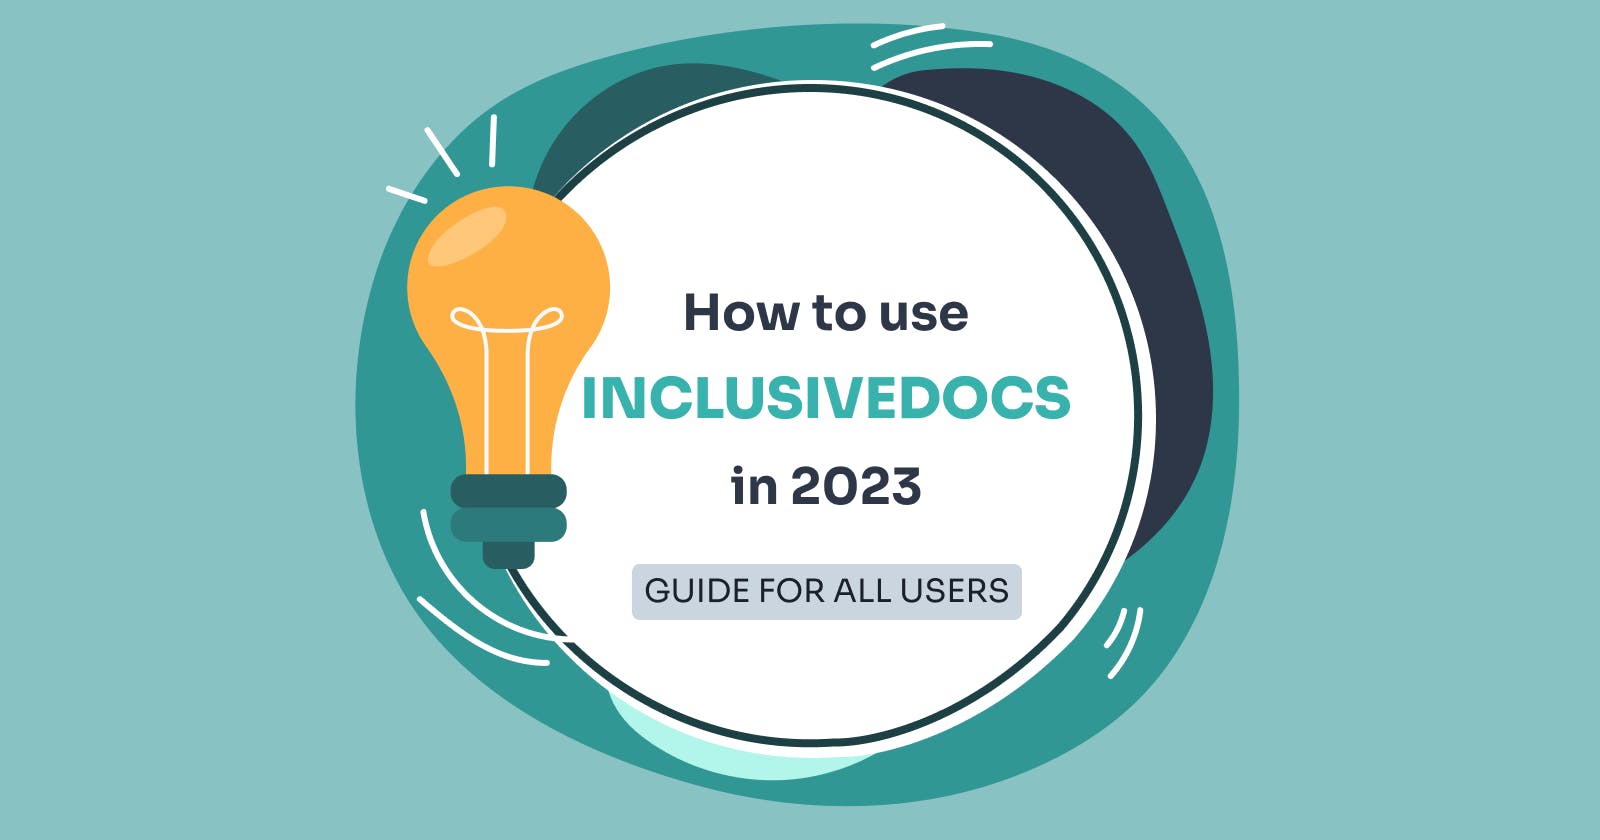 How to Use InslusiveDocs in 2023: Guide for All Users